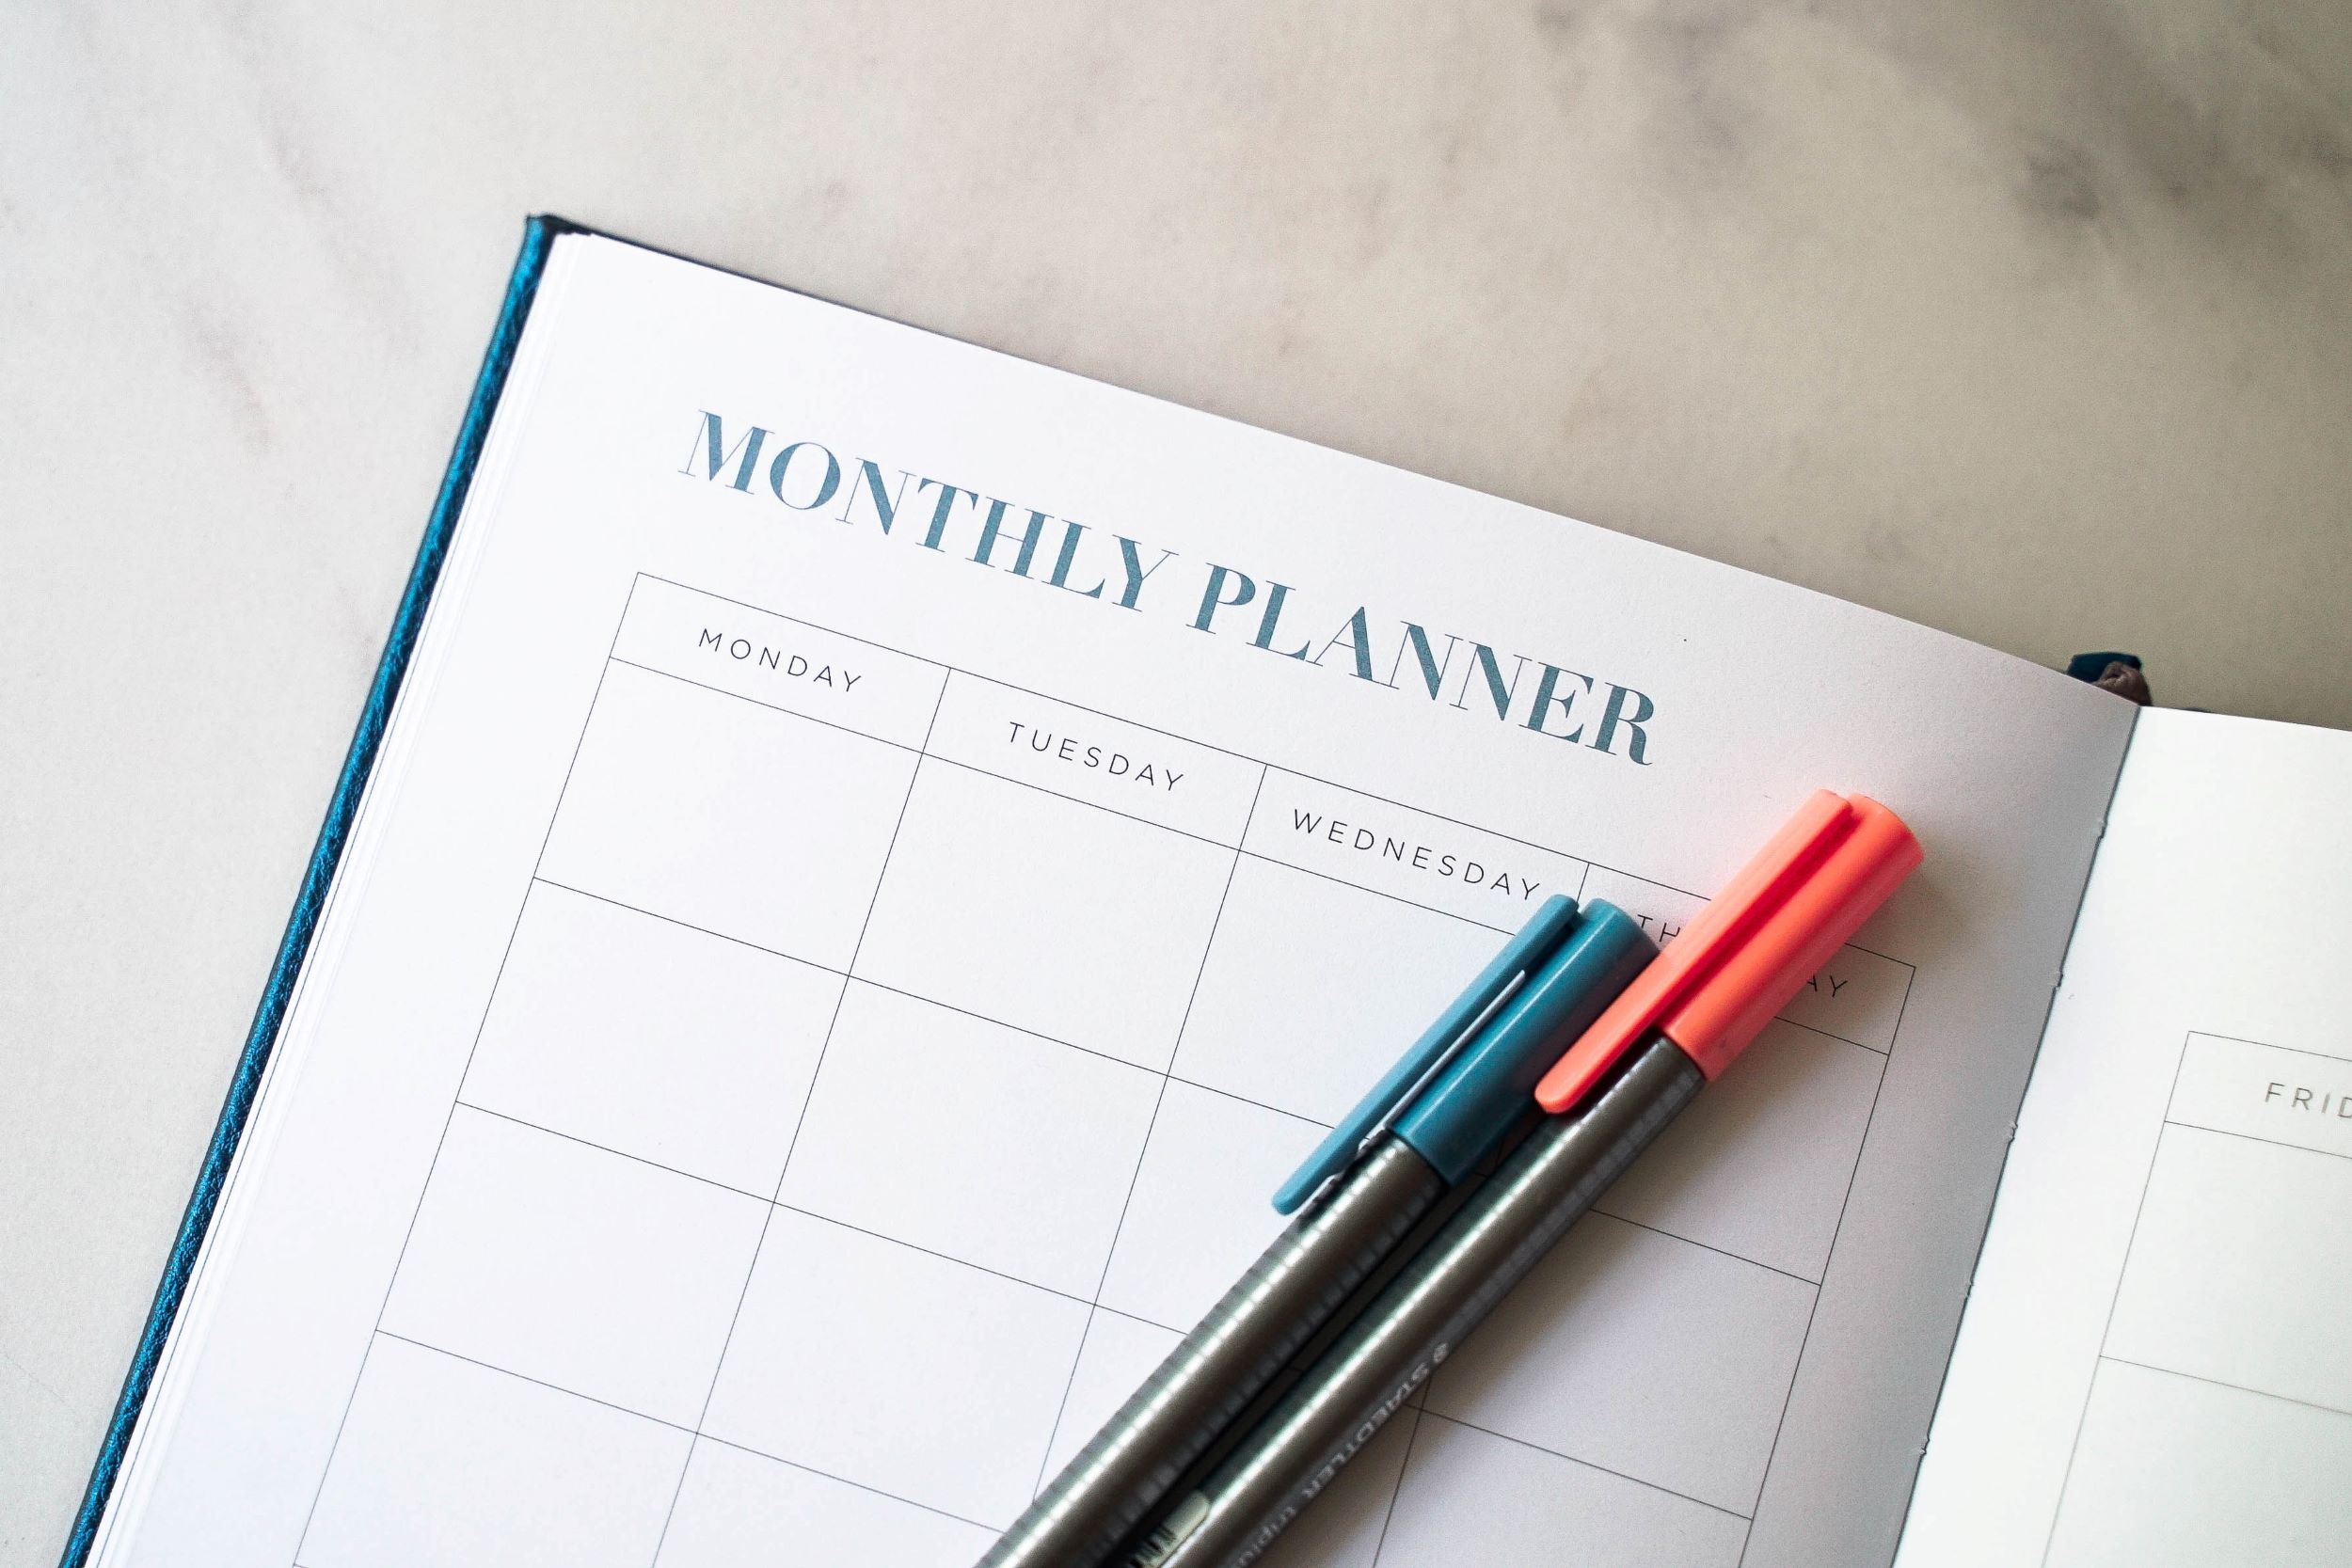 An image of a planner.